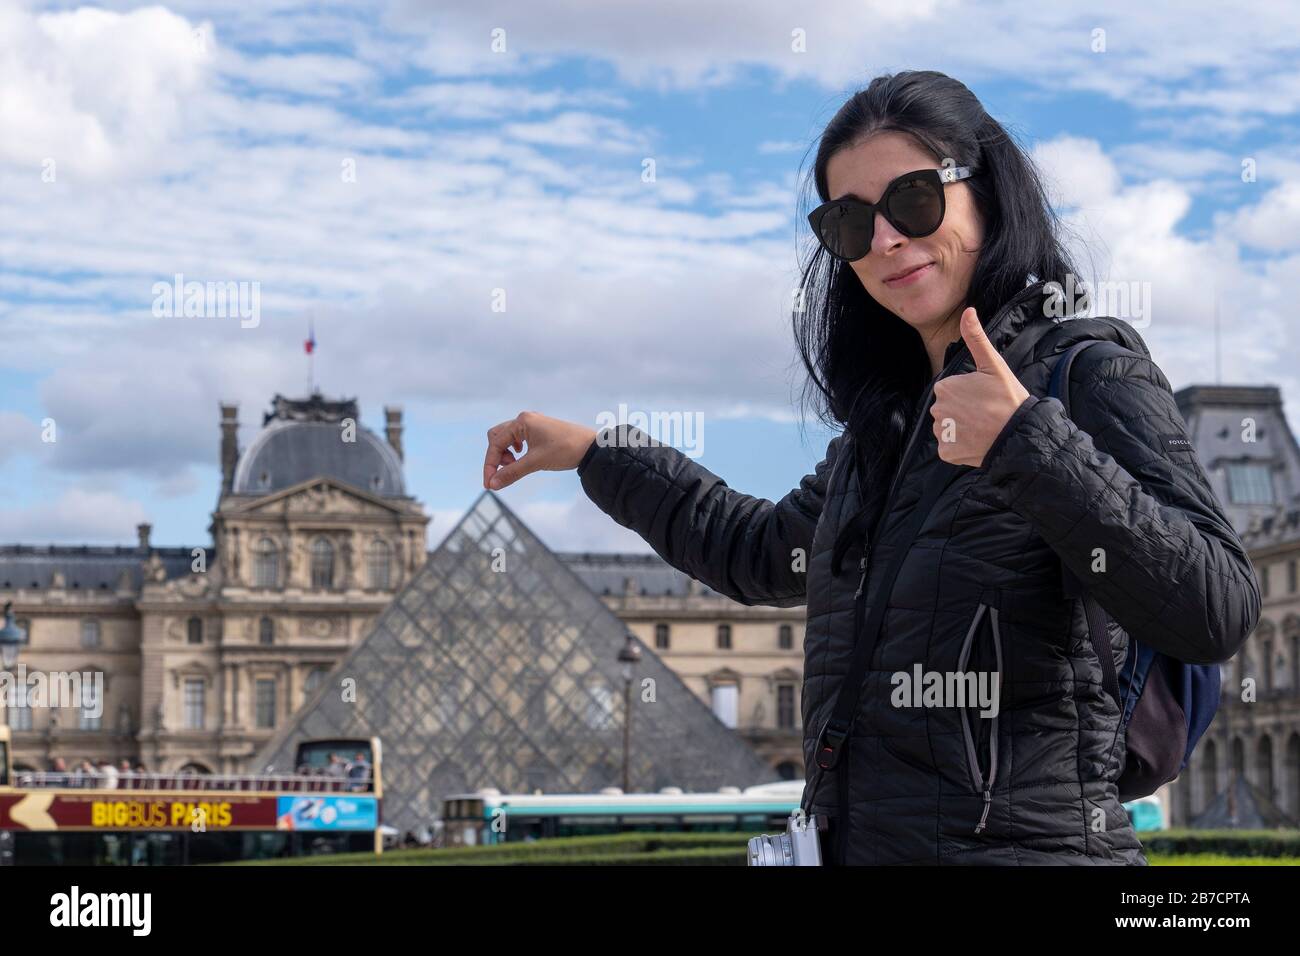 Tourist posing for photograph while pretending to hold the tip of the glass pyramid in front of the Louvre Museum in Paris, France, Europe Stock Photo